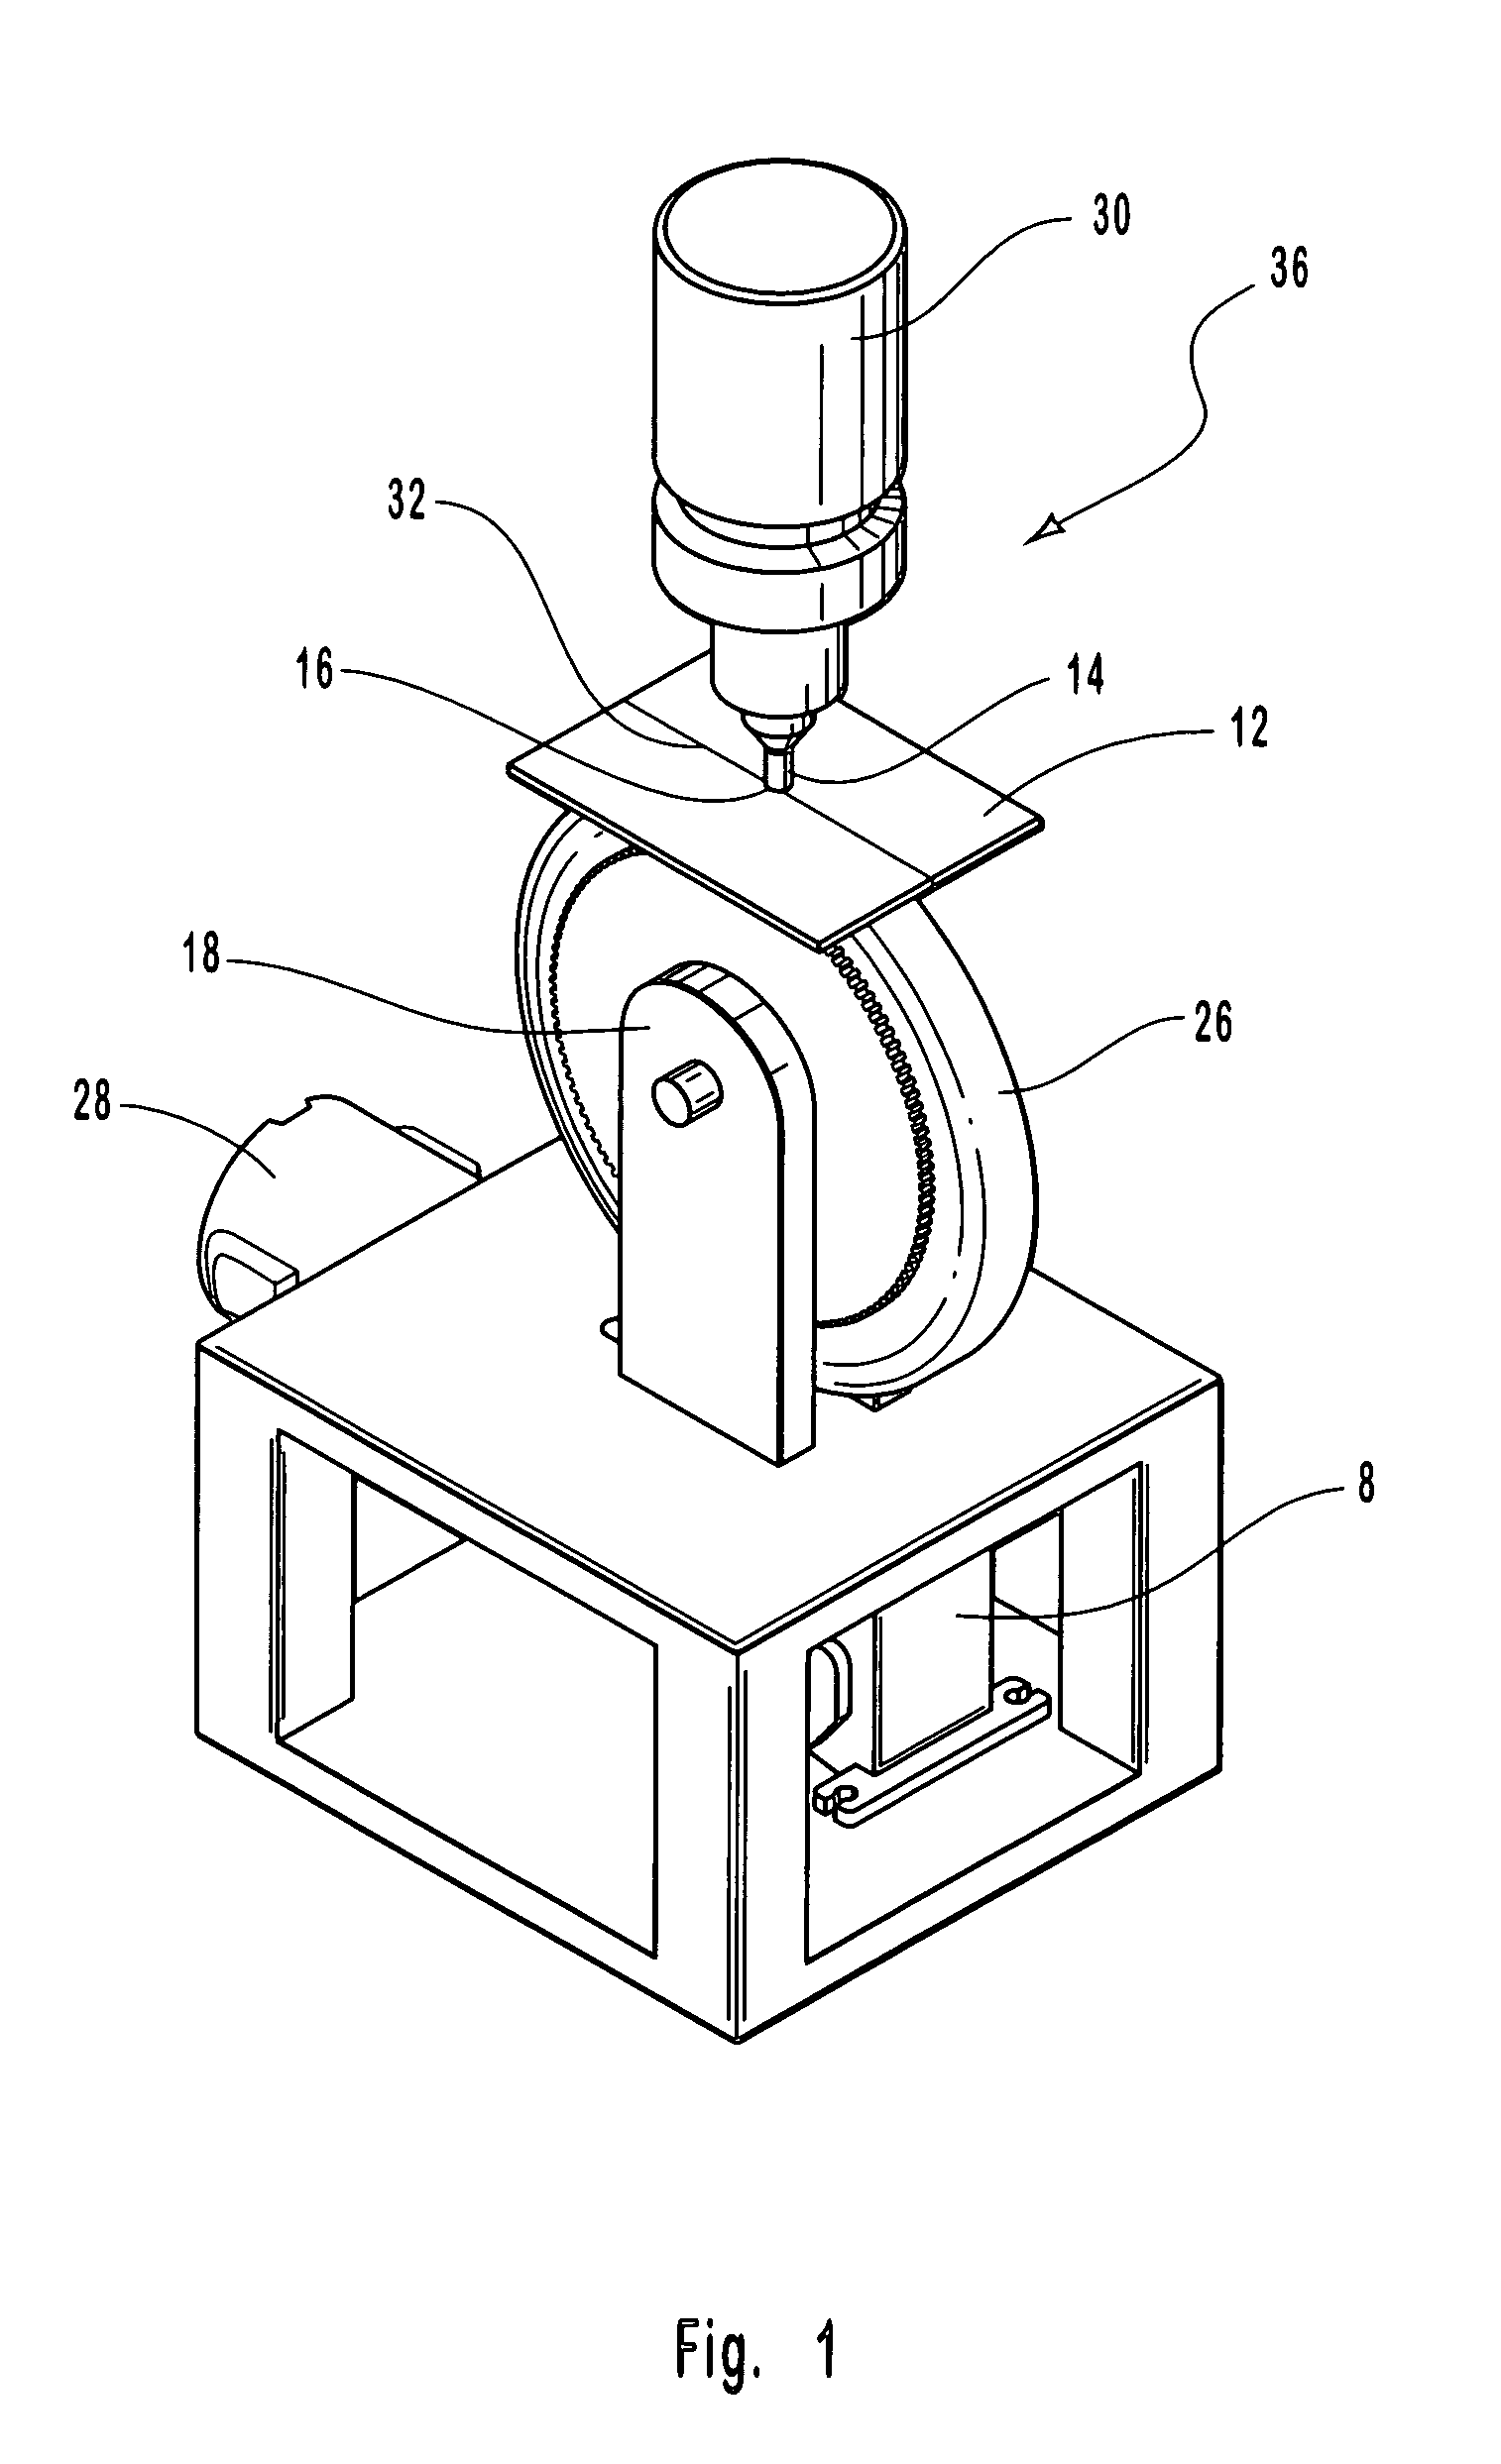 Apparatus and method for performing non-linear friction stir welds on either planar or non-planar surfaces